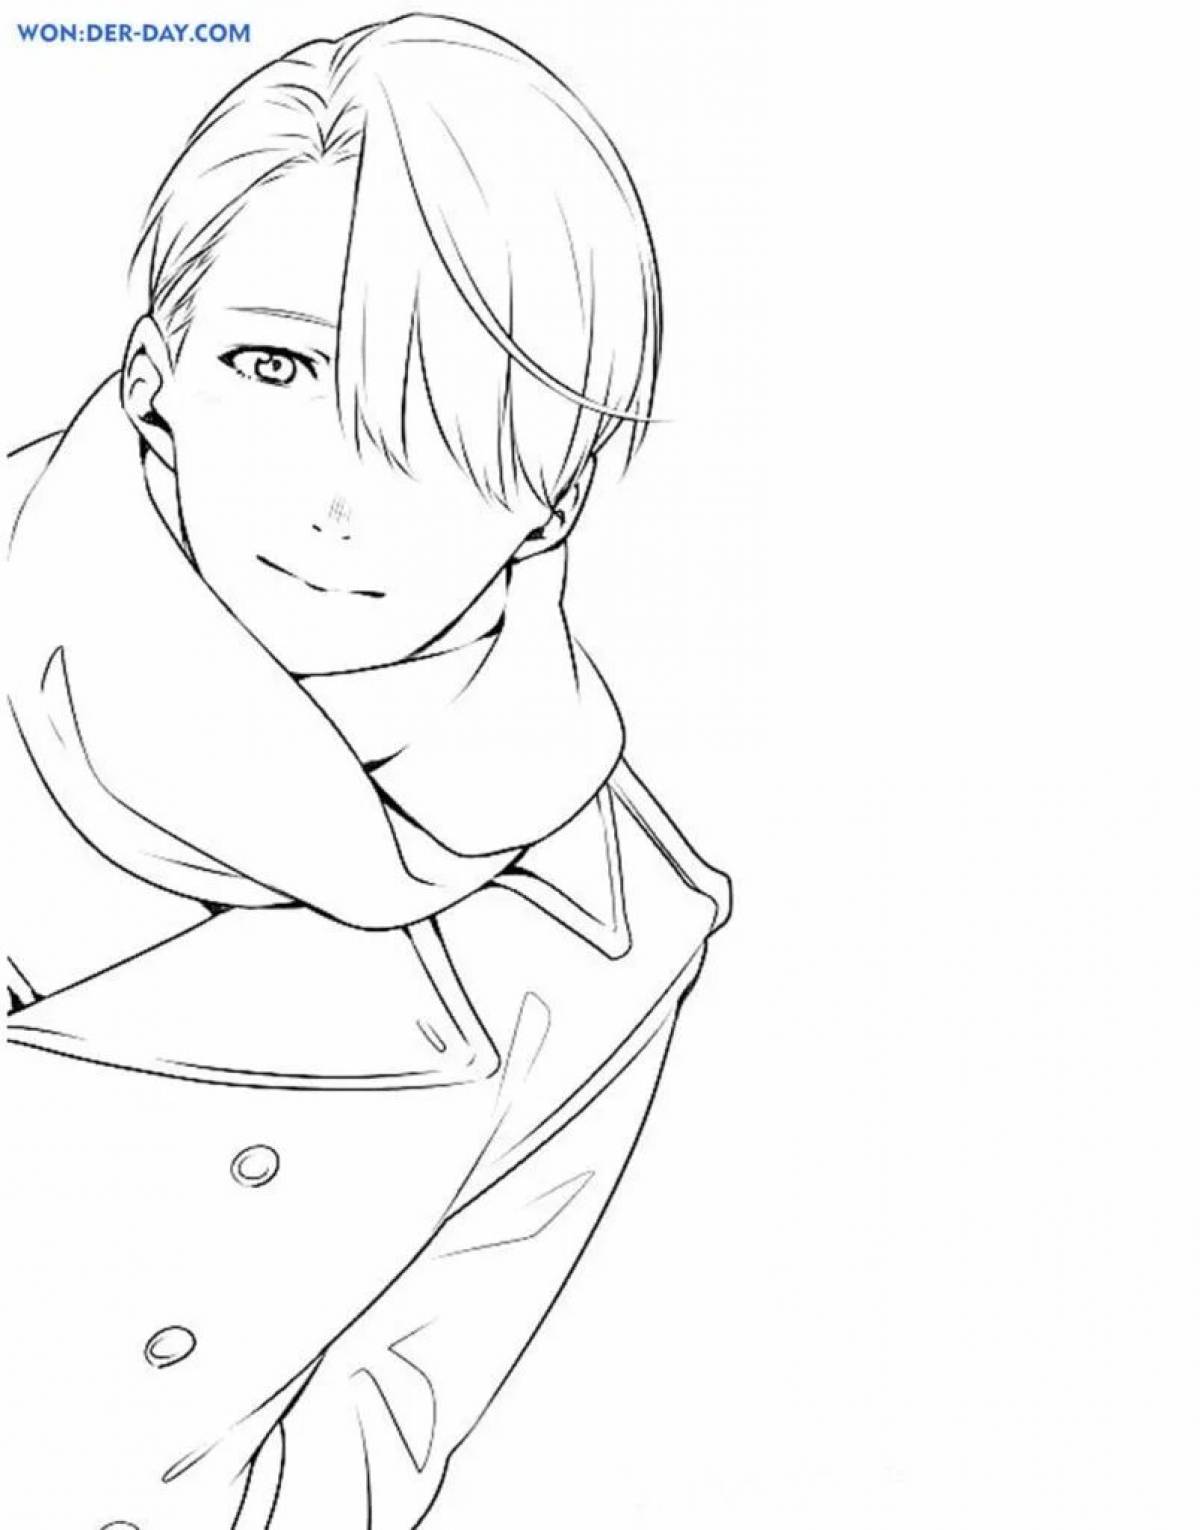 Yuri on ice coloring page filled with color